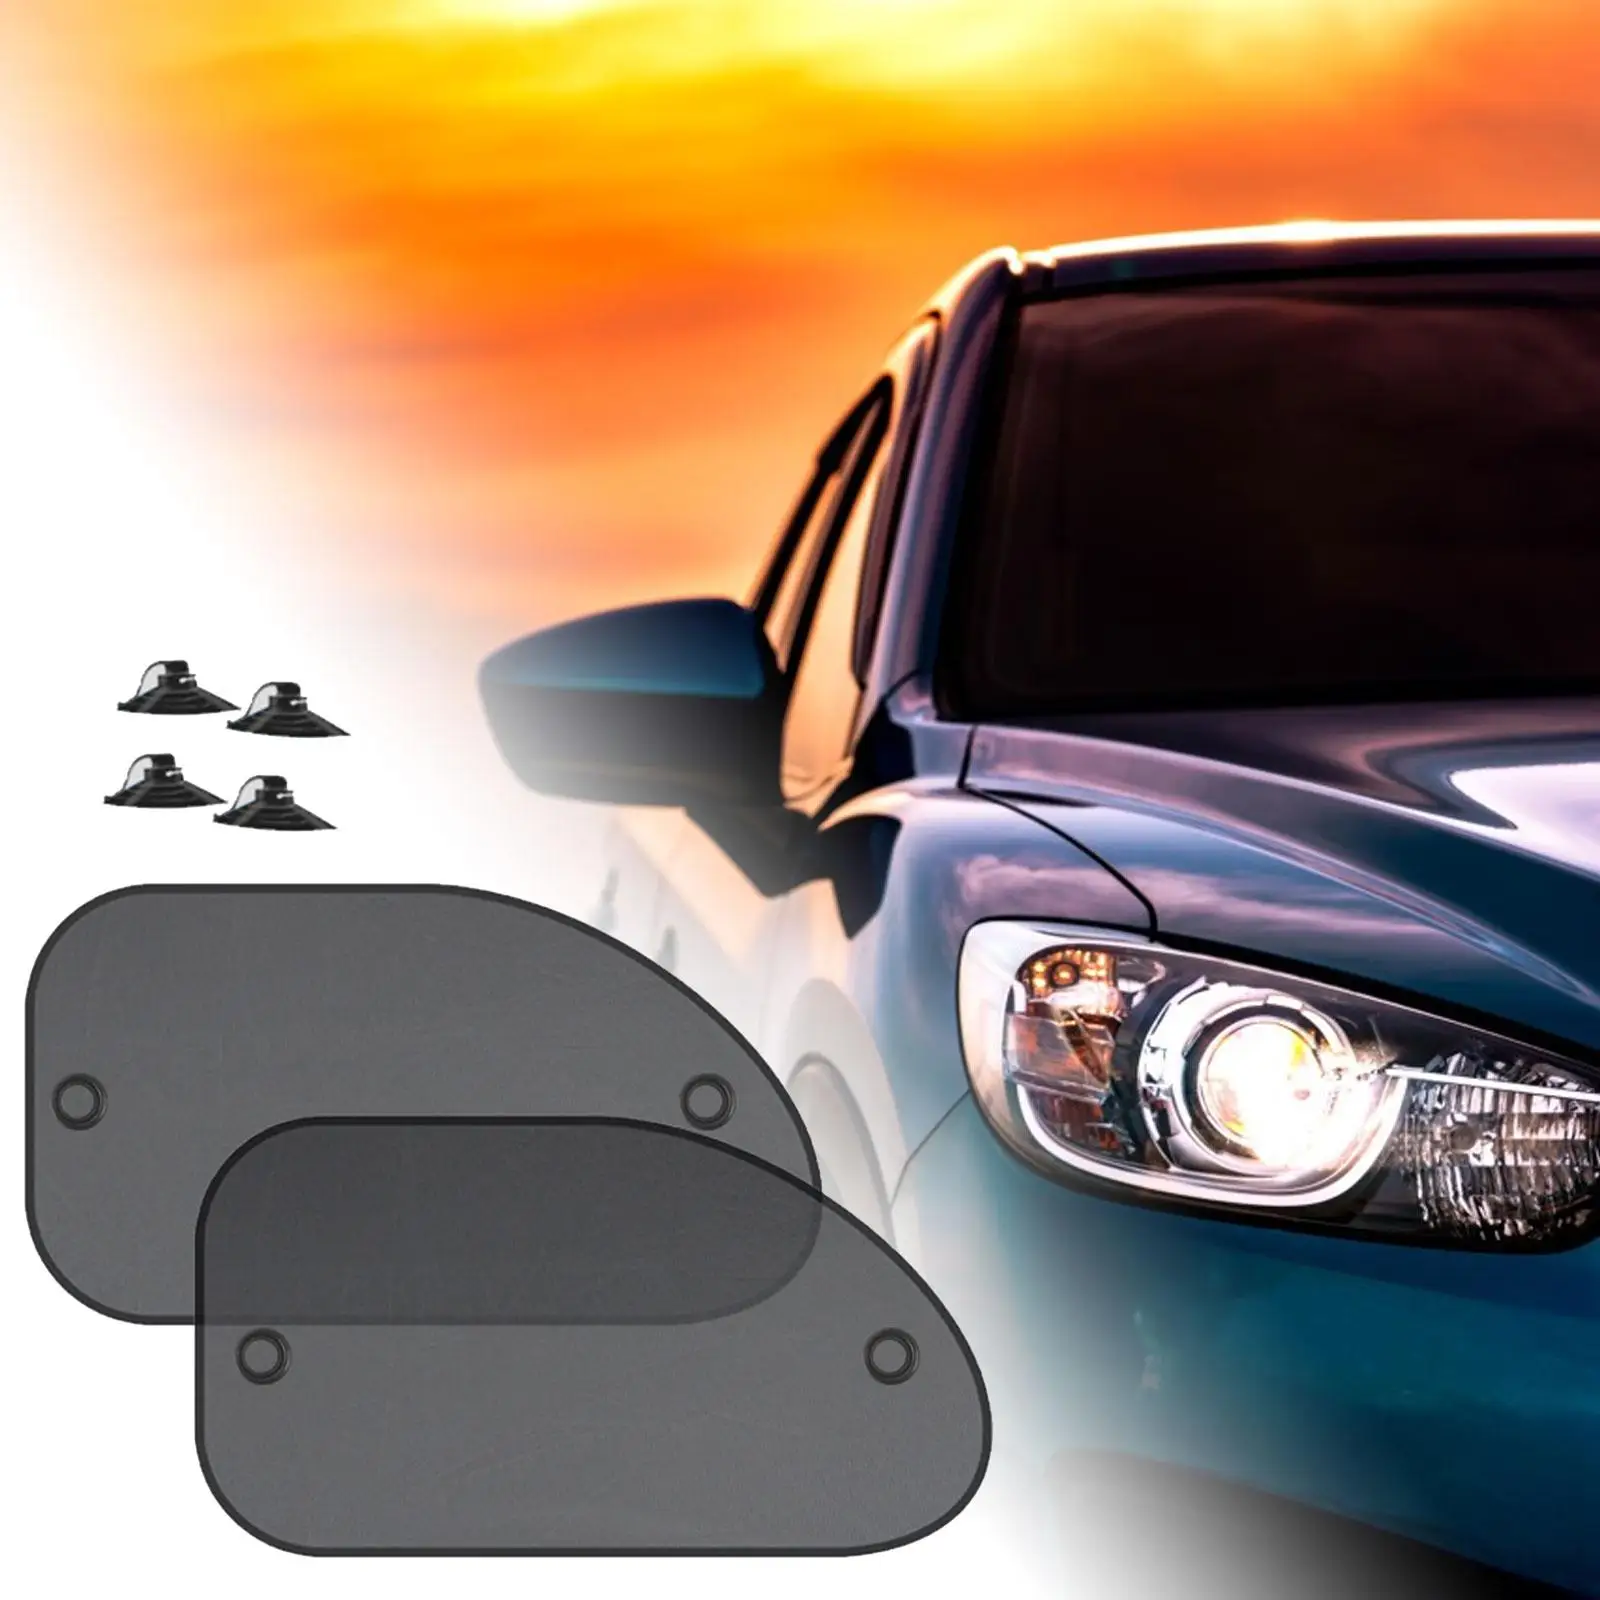 2 Pieces Car Side Window Shades Blackout Covers Auto Car Interior Accessories for Keep Passengers and Car Interior Cool